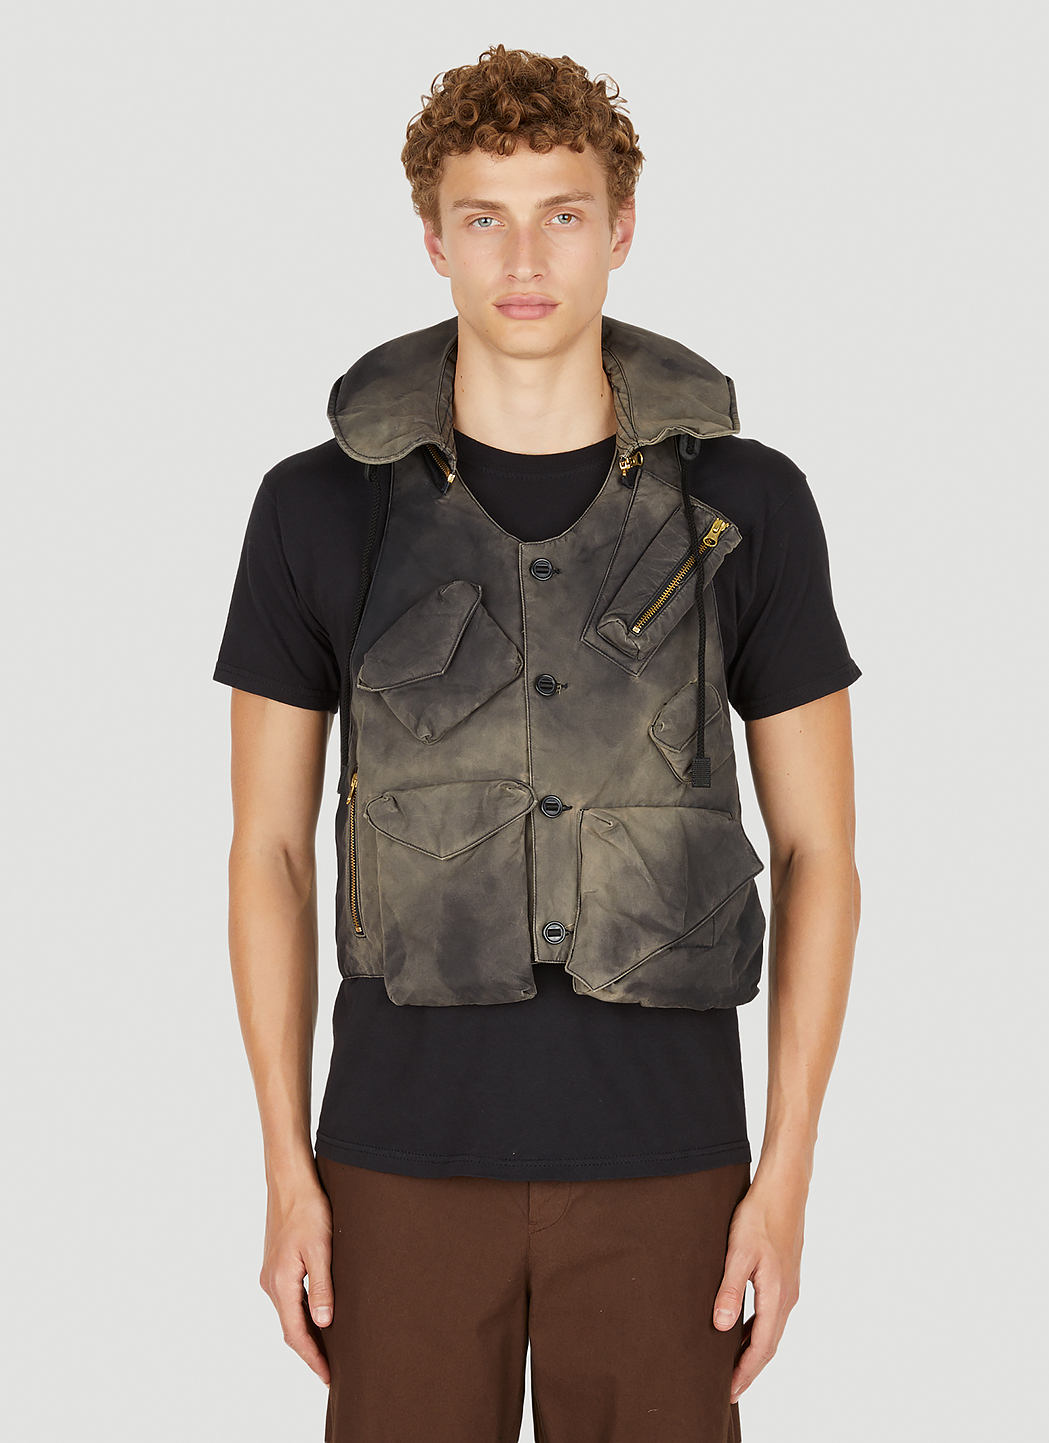 Applied Art Forms Rescue Sleeveless Jacket